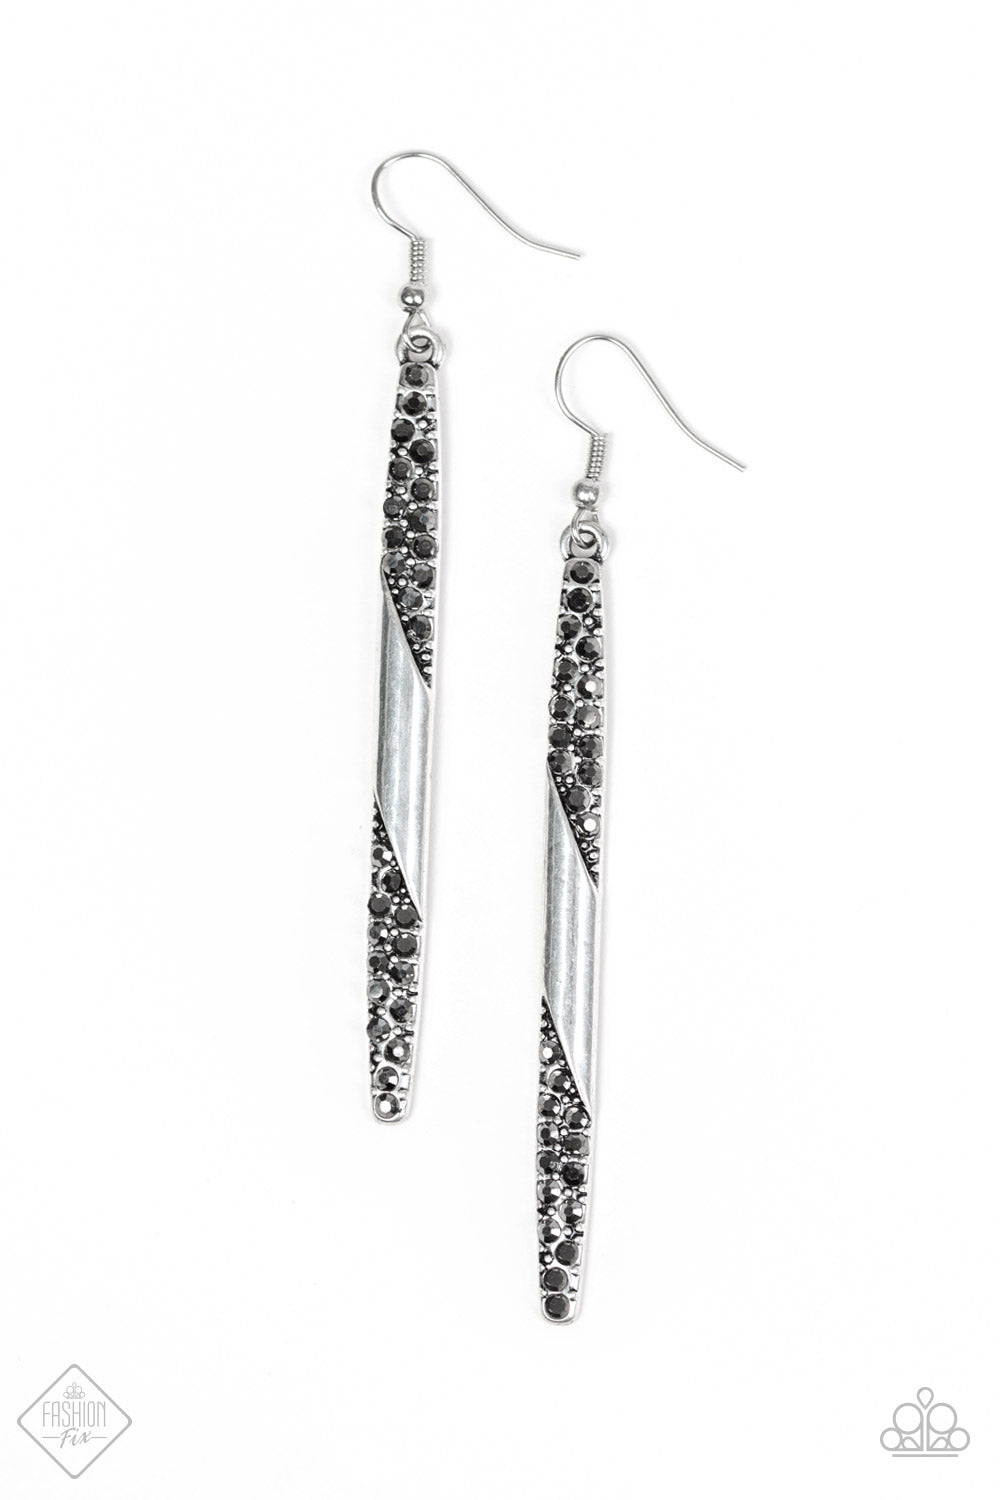 Paparazzi Accessories Award Show Attitude - Earrings - Lady T Accessories